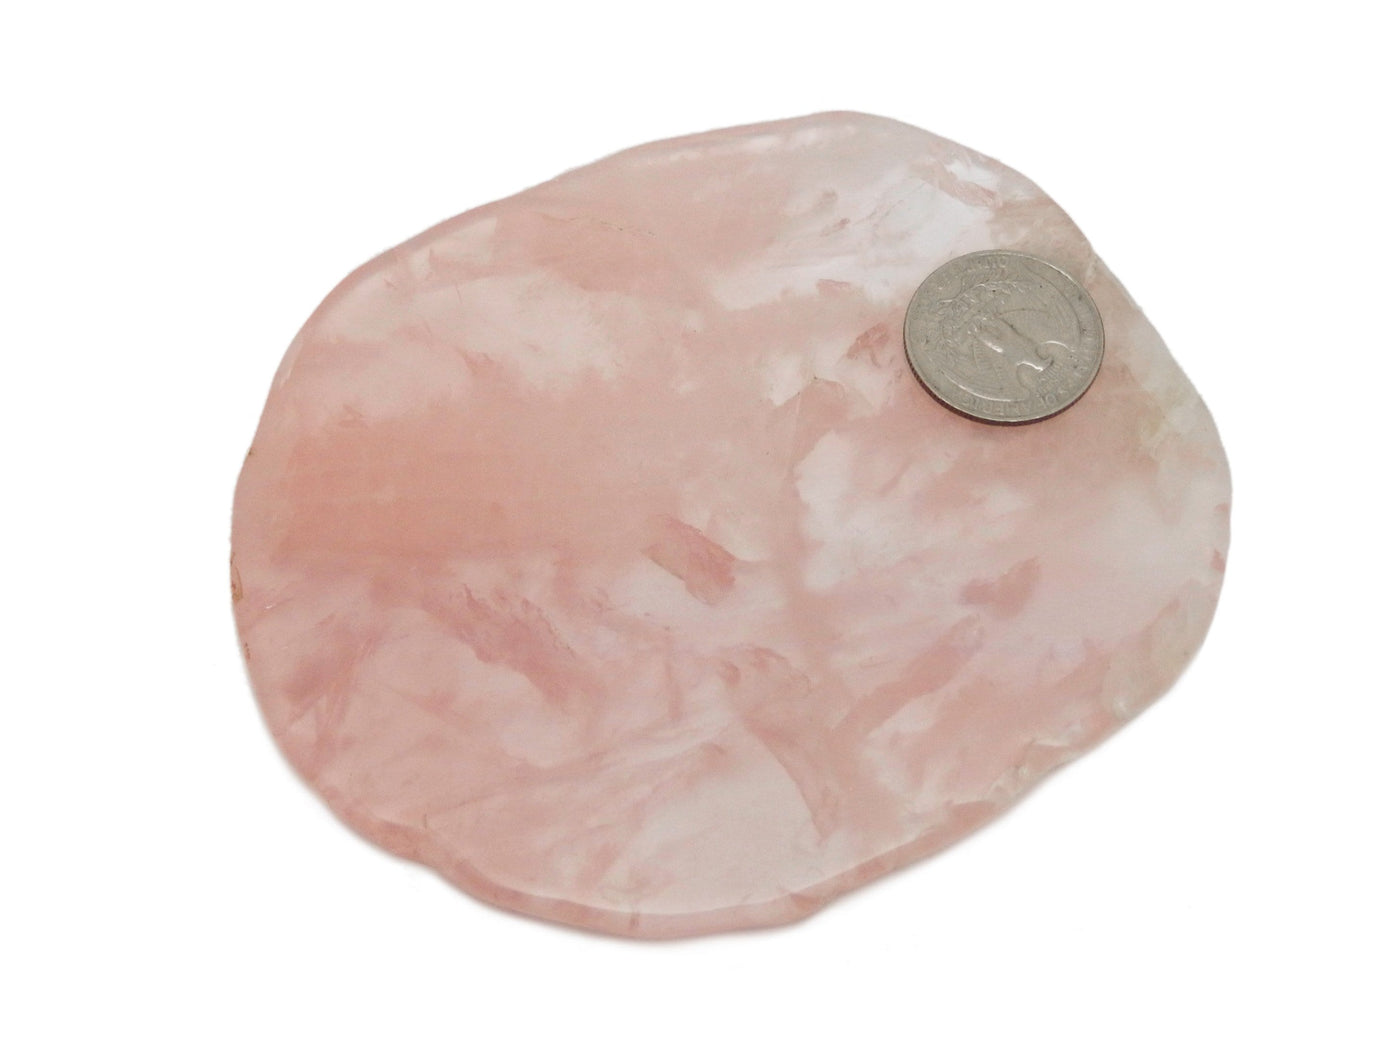 Free Form Stone Coaster - One Rose Quartz Coaster with A Quarter For Size Reference 